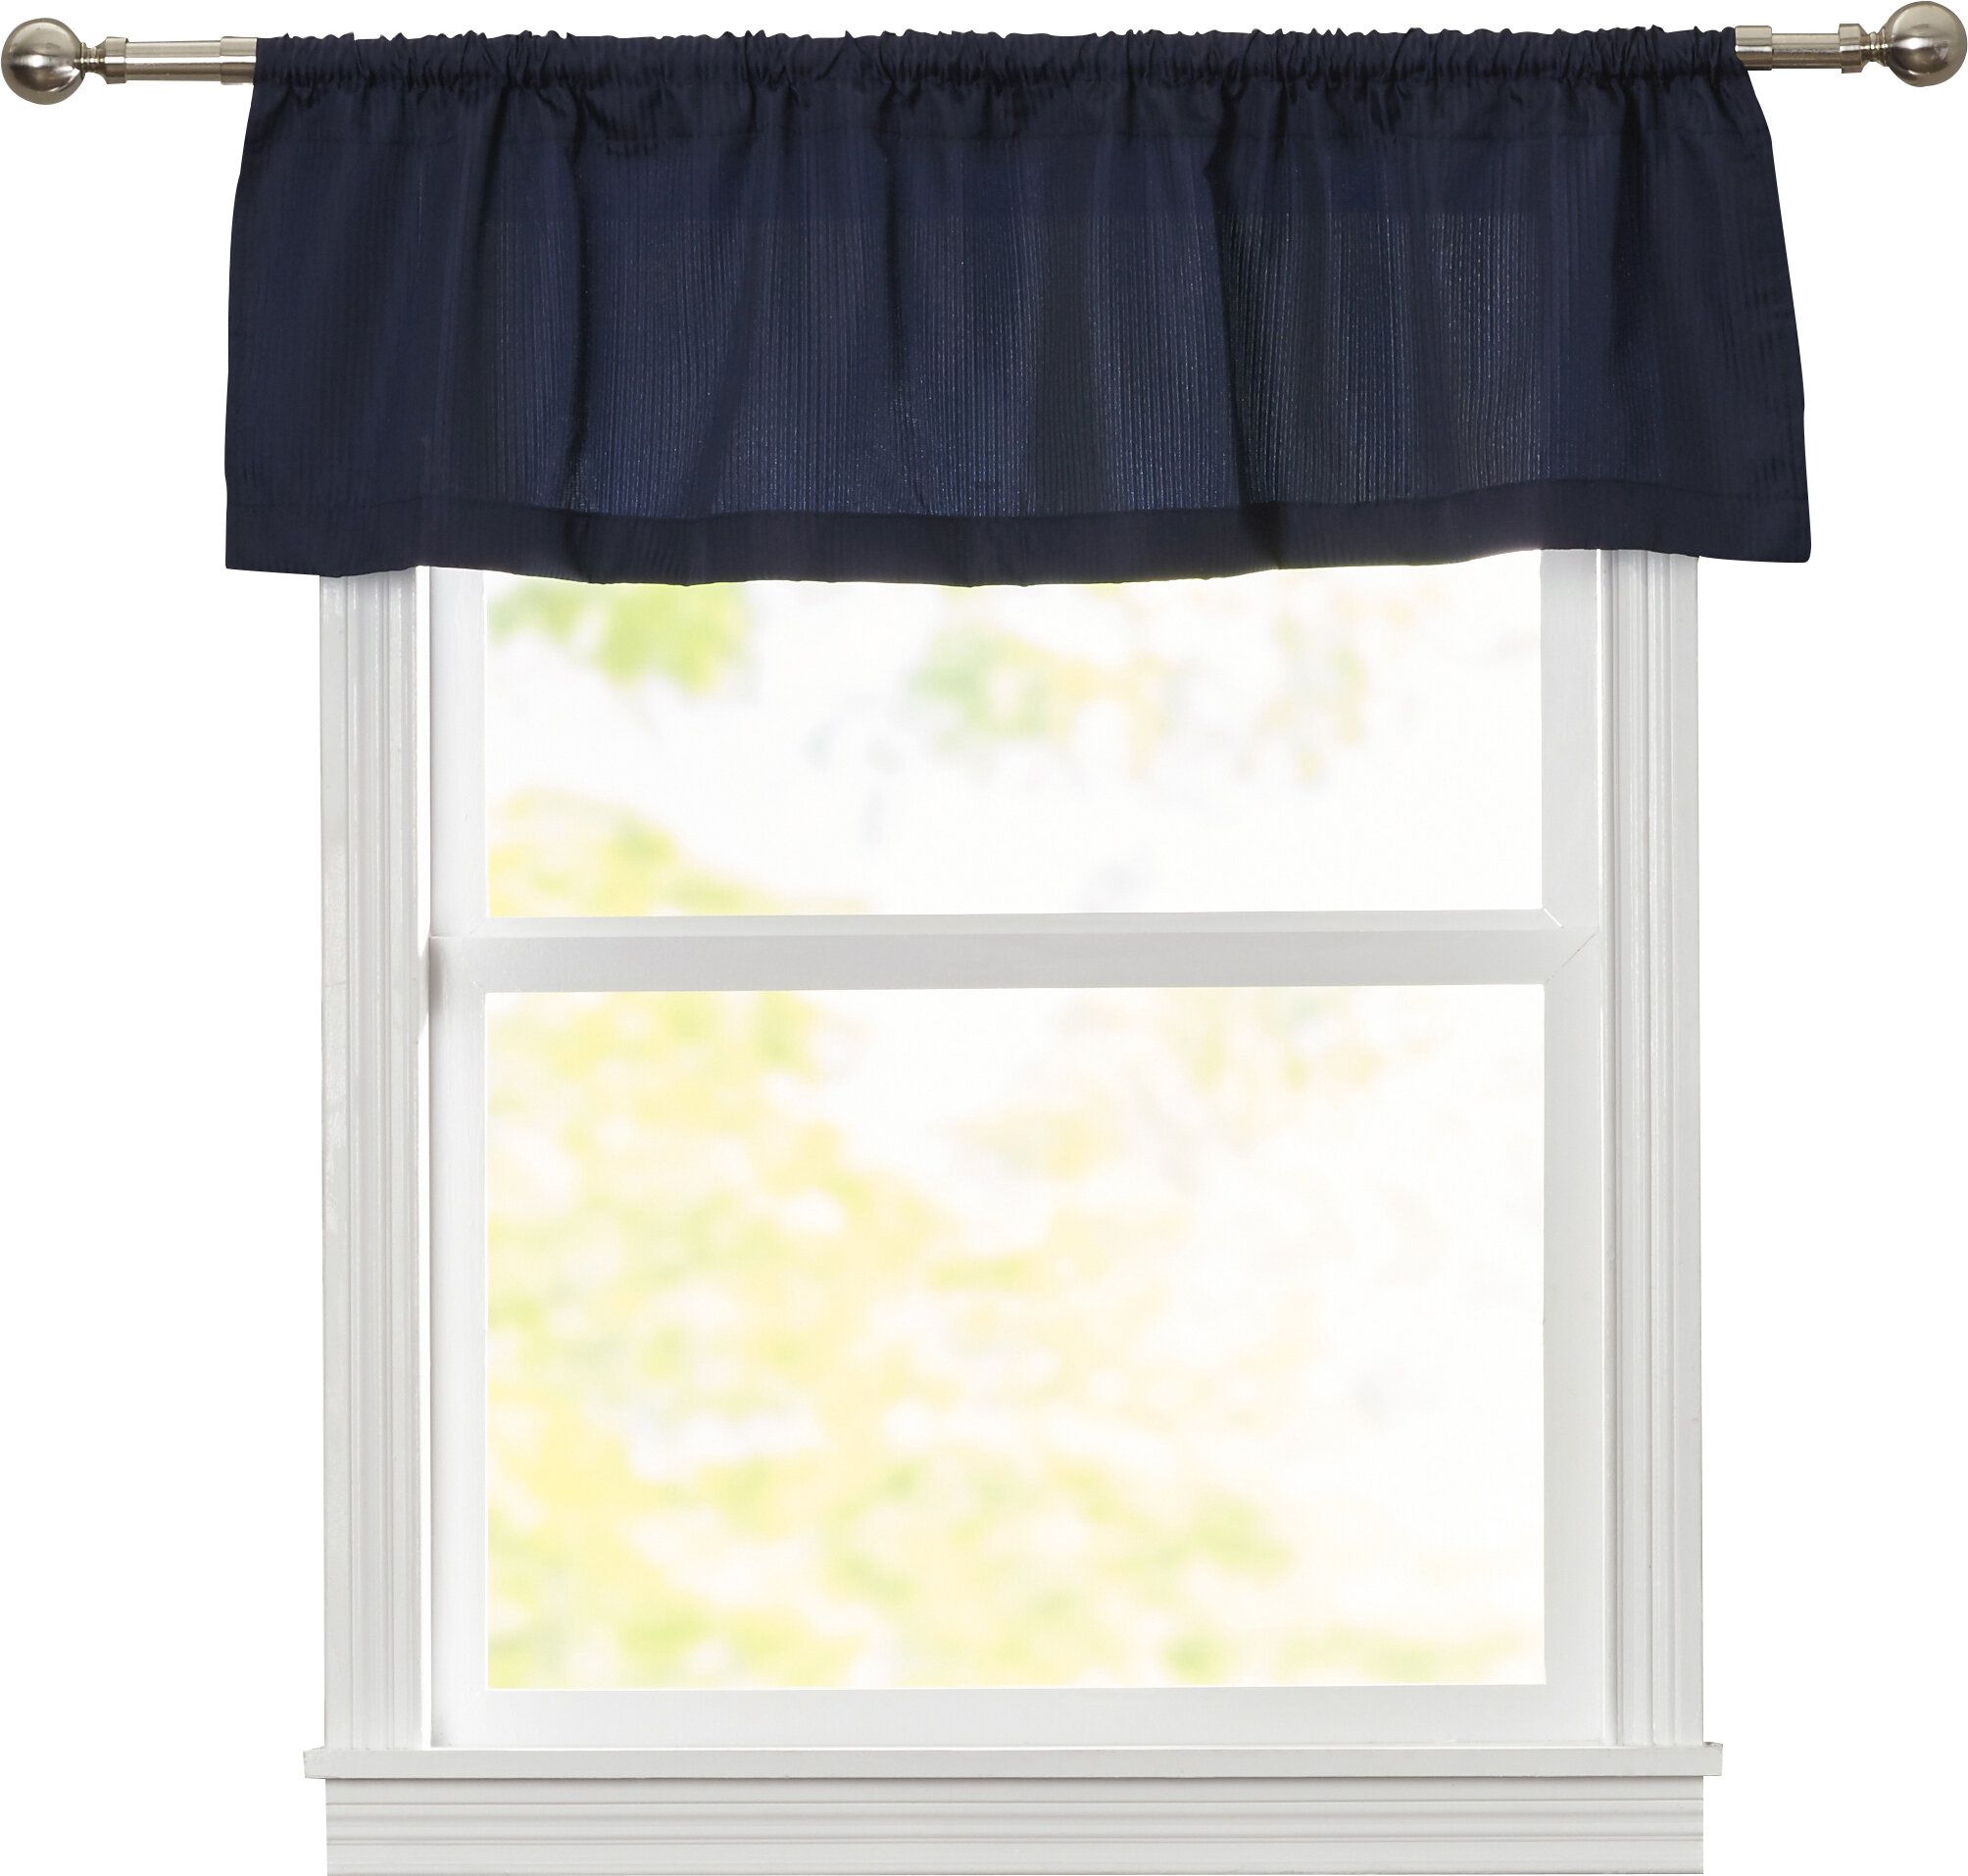 Reinhardt Rod Pocket Tailored 54" Window Valance Inside Tailored Toppers With Valances (View 19 of 20)